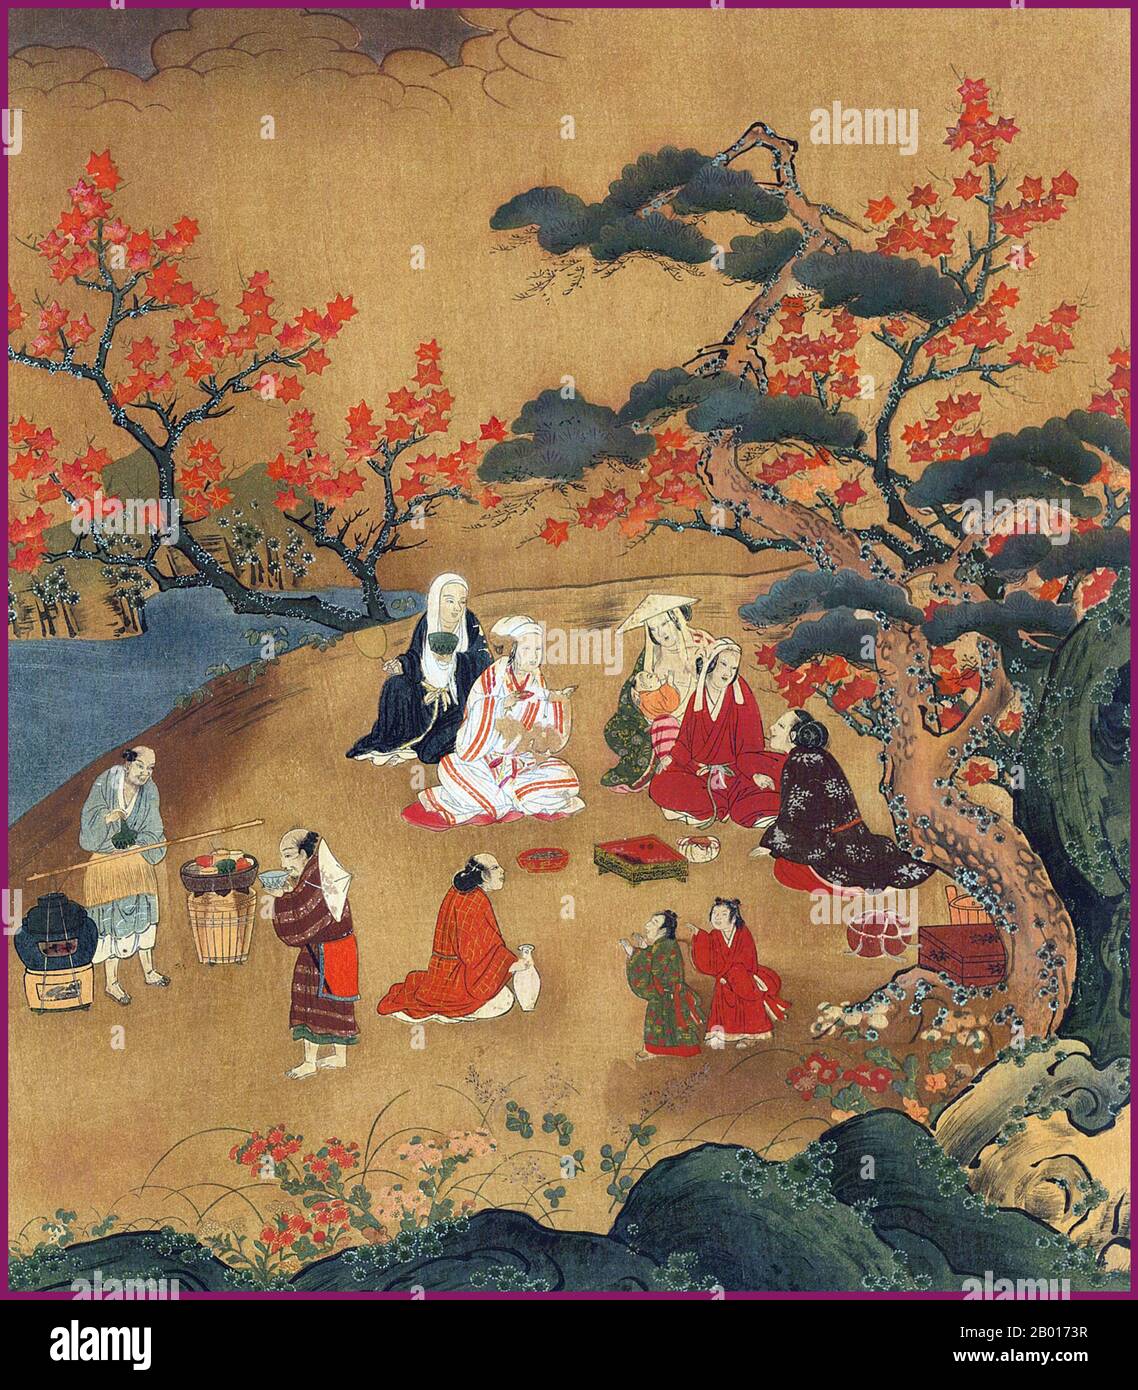 Japan: 'Women Looking at the Maple Trees at Takao, near Kyoto'. Illustration by Kano Hideyori (Muromachi period, 16th century).  Yamato-e is a style of Japanese painting inspired by Tang Dynasty paintings and developed in the late Heian period. It is considered the classical Japanese style. From the Muromachi period (15th century), the term Yamato-e has been used to distinguish work from contemporary Chinese style paintings (kara-e), which were inspired by Song and Yuan Dynasty Zen Buddhism paintings. Stock Photo